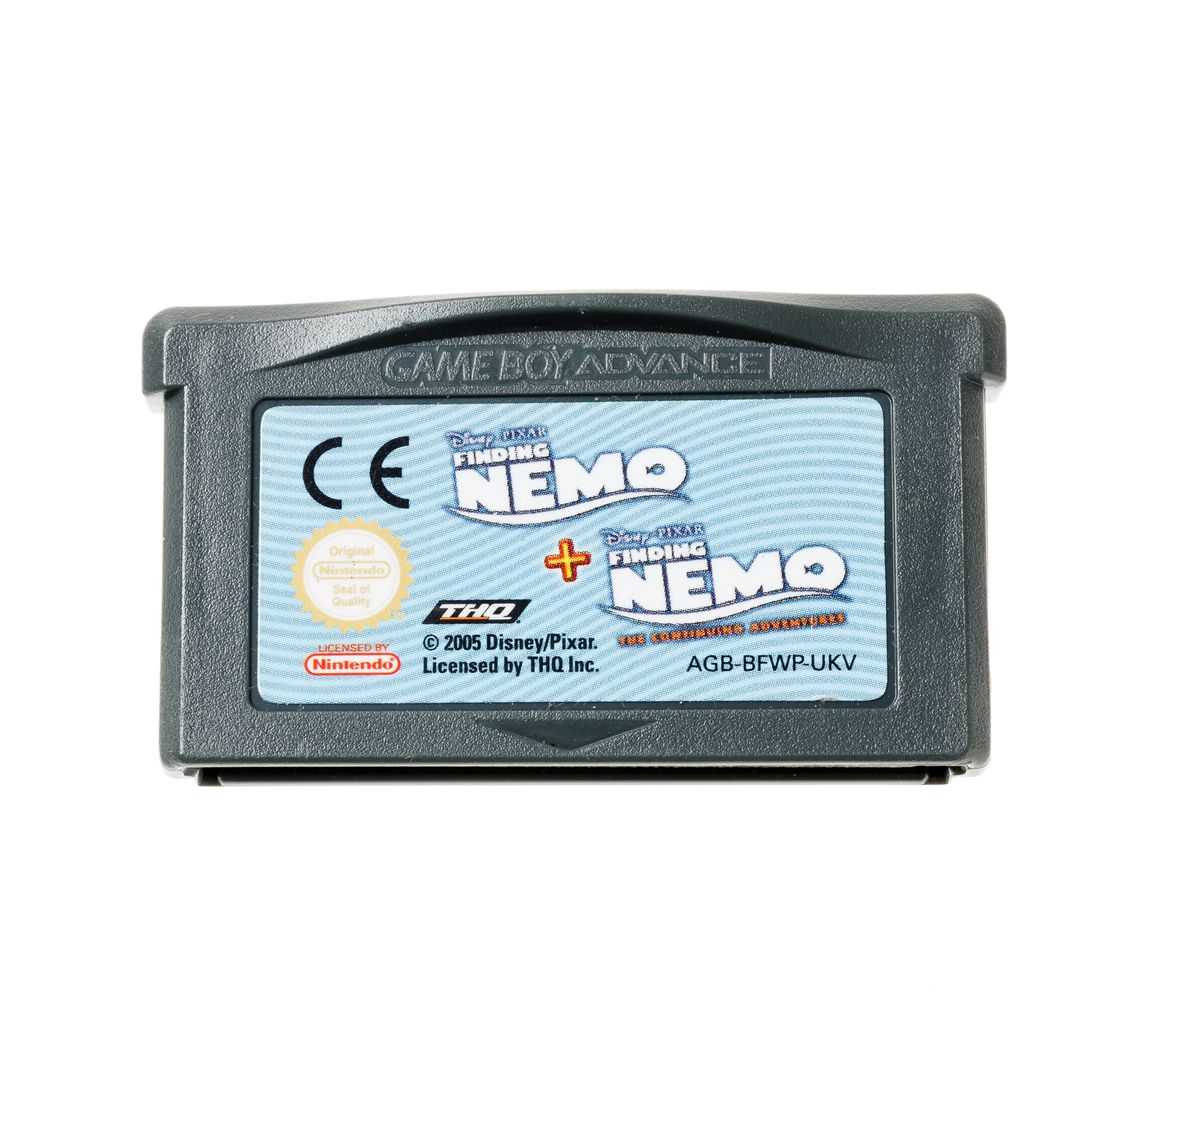 Finding Nemo + Finding Nemo The Continued Adventures | Gameboy Advance Games | RetroNintendoKopen.nl